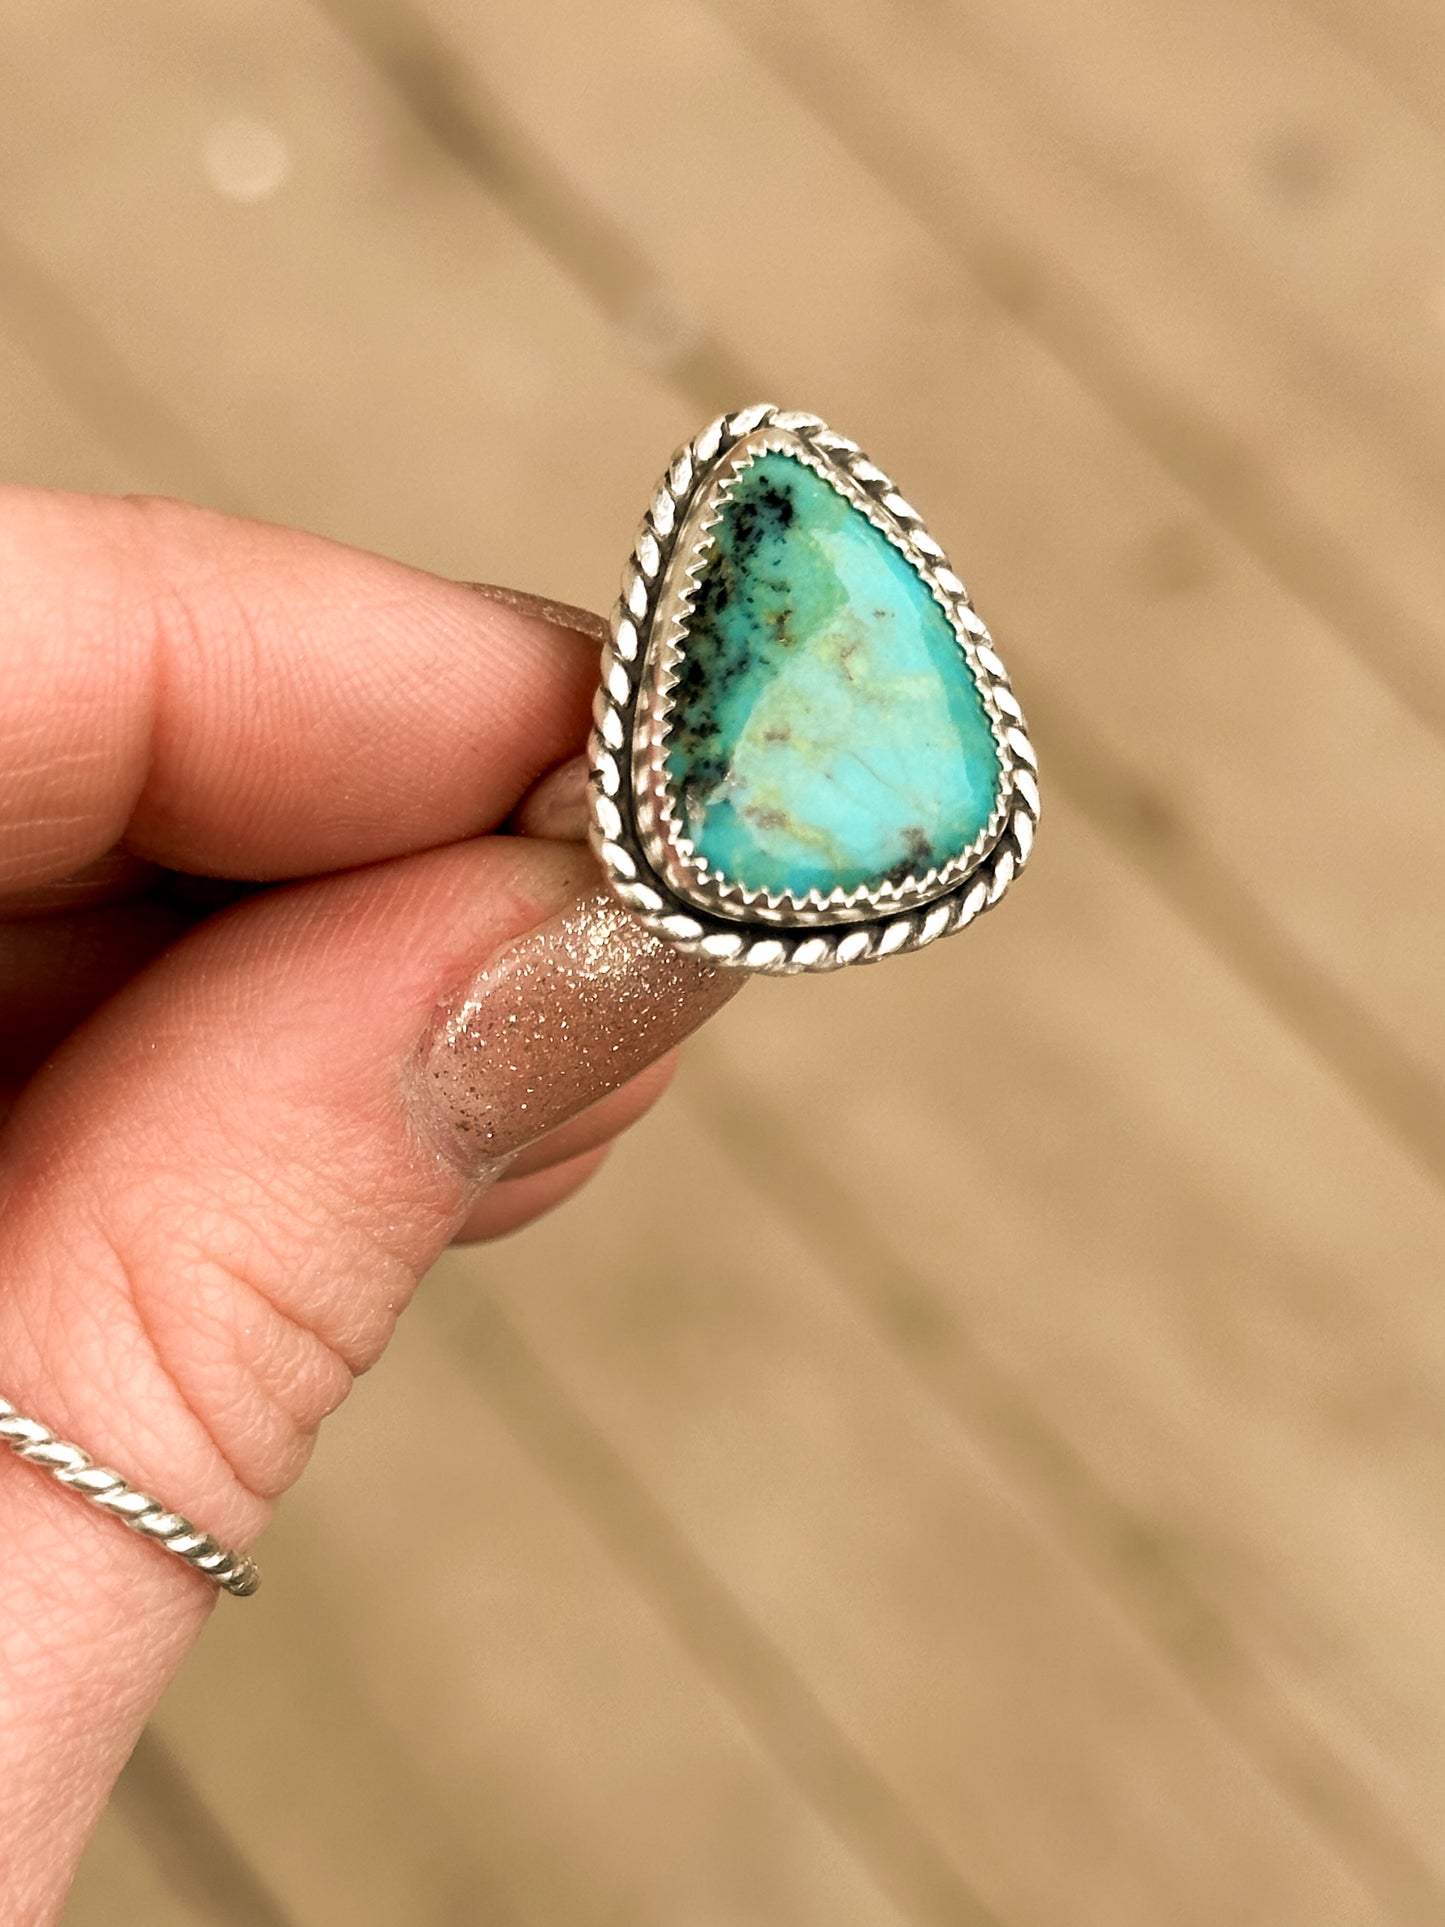 Baja Turquoise & Sterling Silver Statement Ring